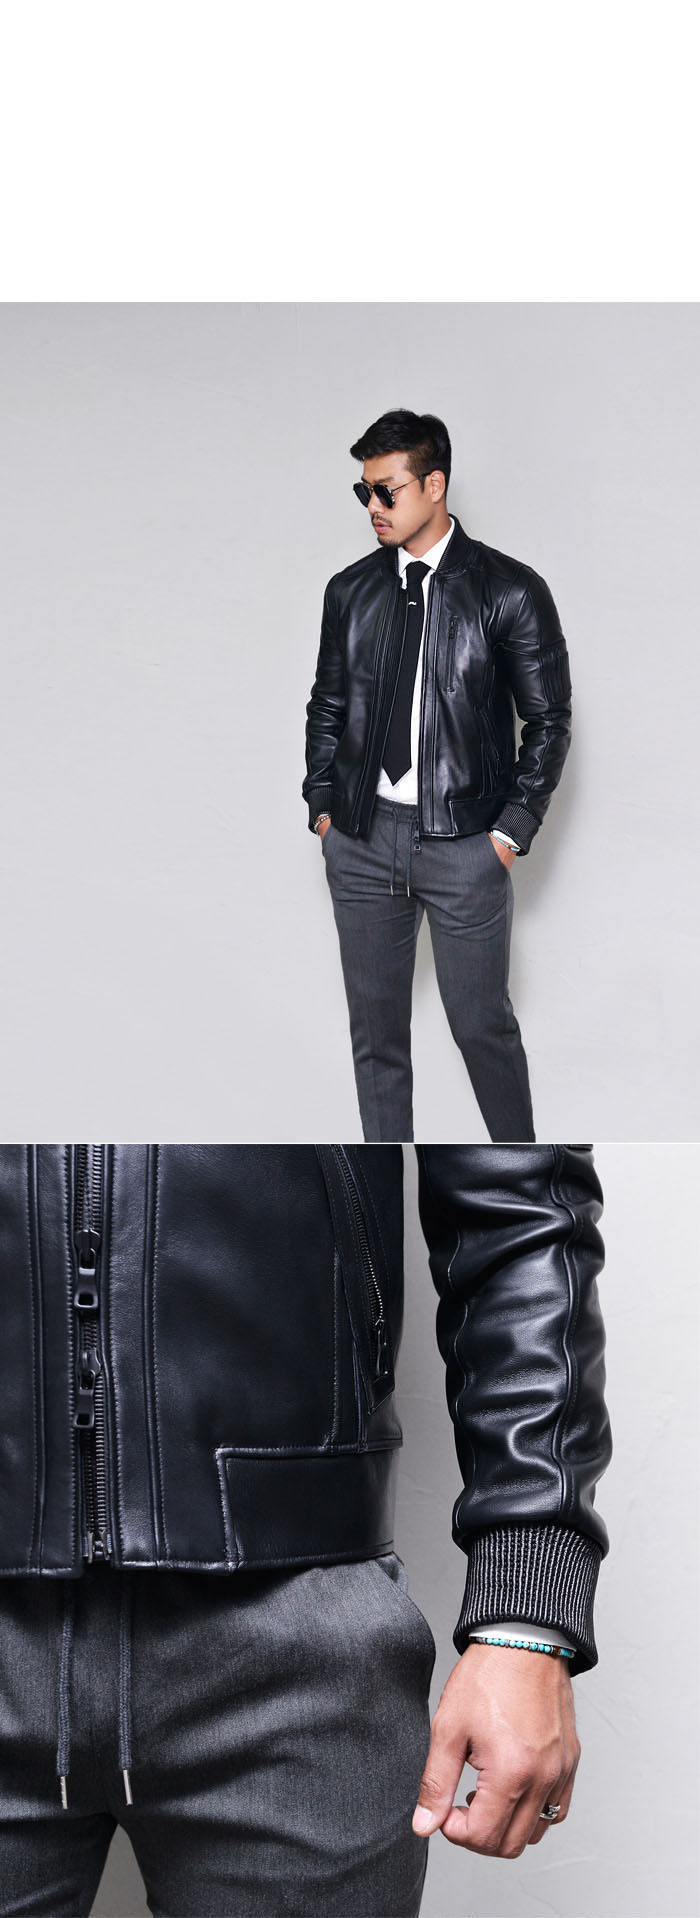 Leather141_6